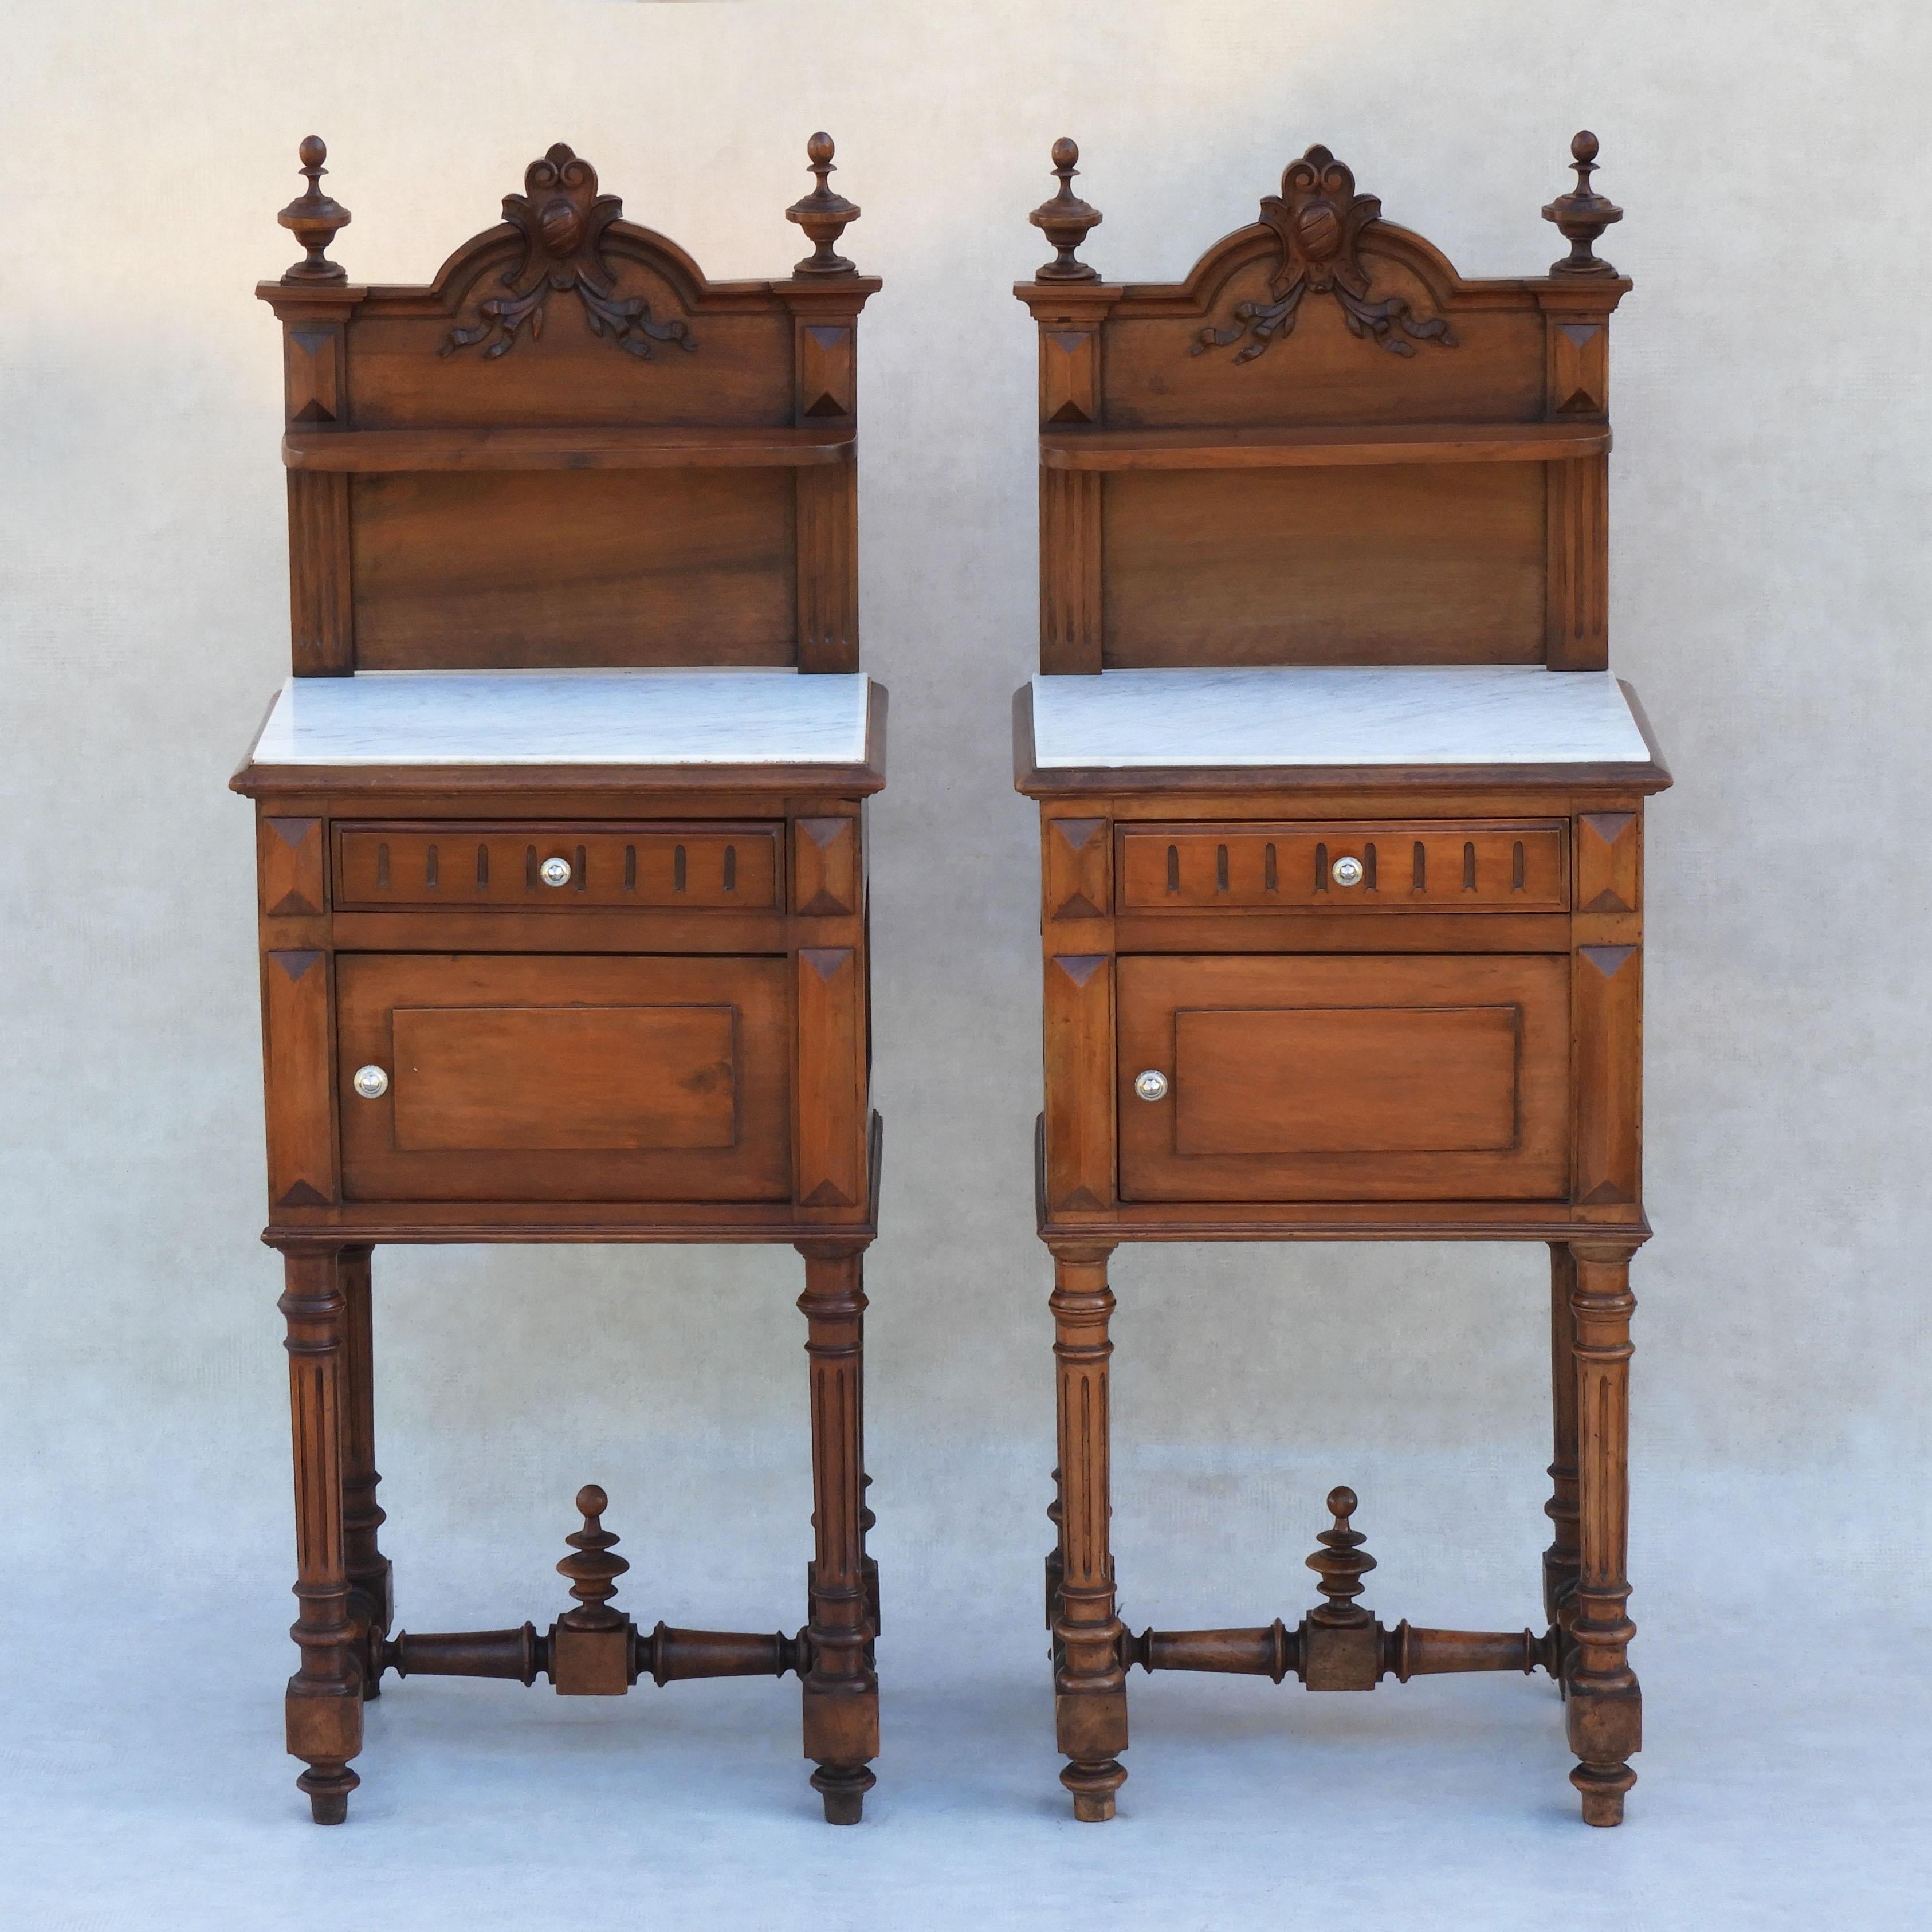 Pair of French antique night stands in walnut and marble C1890

A fabulous pair of Antique bedside cabinets or night stands from 19th century France. 

Two solid walnut cabinets each with a marble top, shelf, drawer and ceramic lined cupboard. Tall,